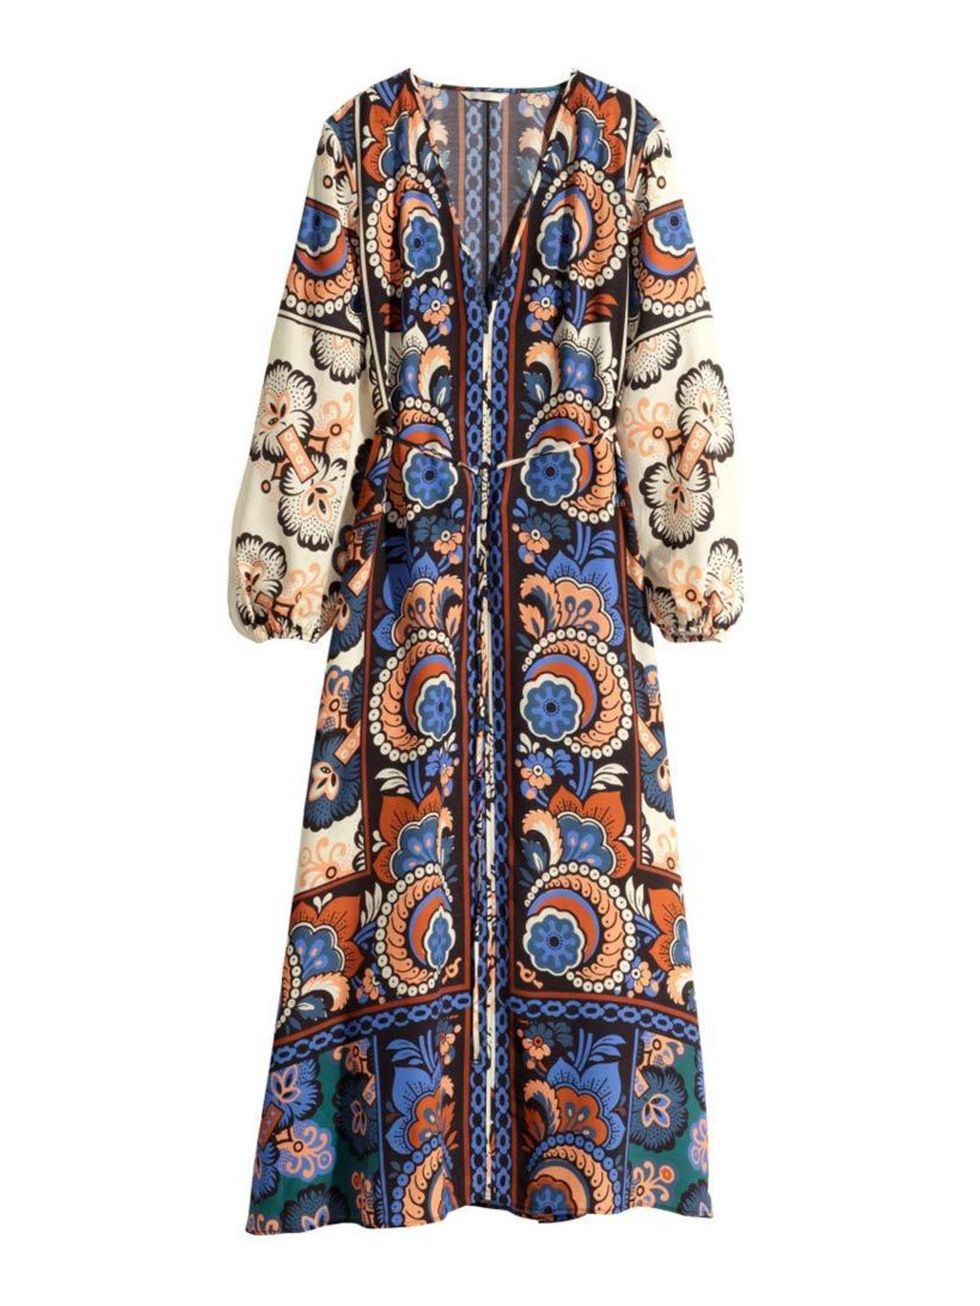 <p>This printed maxi is Digital Director (and not so secret hippy) Phebe Hunnicutt's pick.</p>

<p><a href="http://www.hm.com/gb/product/85095?article=85095-A" target="_blank">H&M</a> dress, £49.99</p>